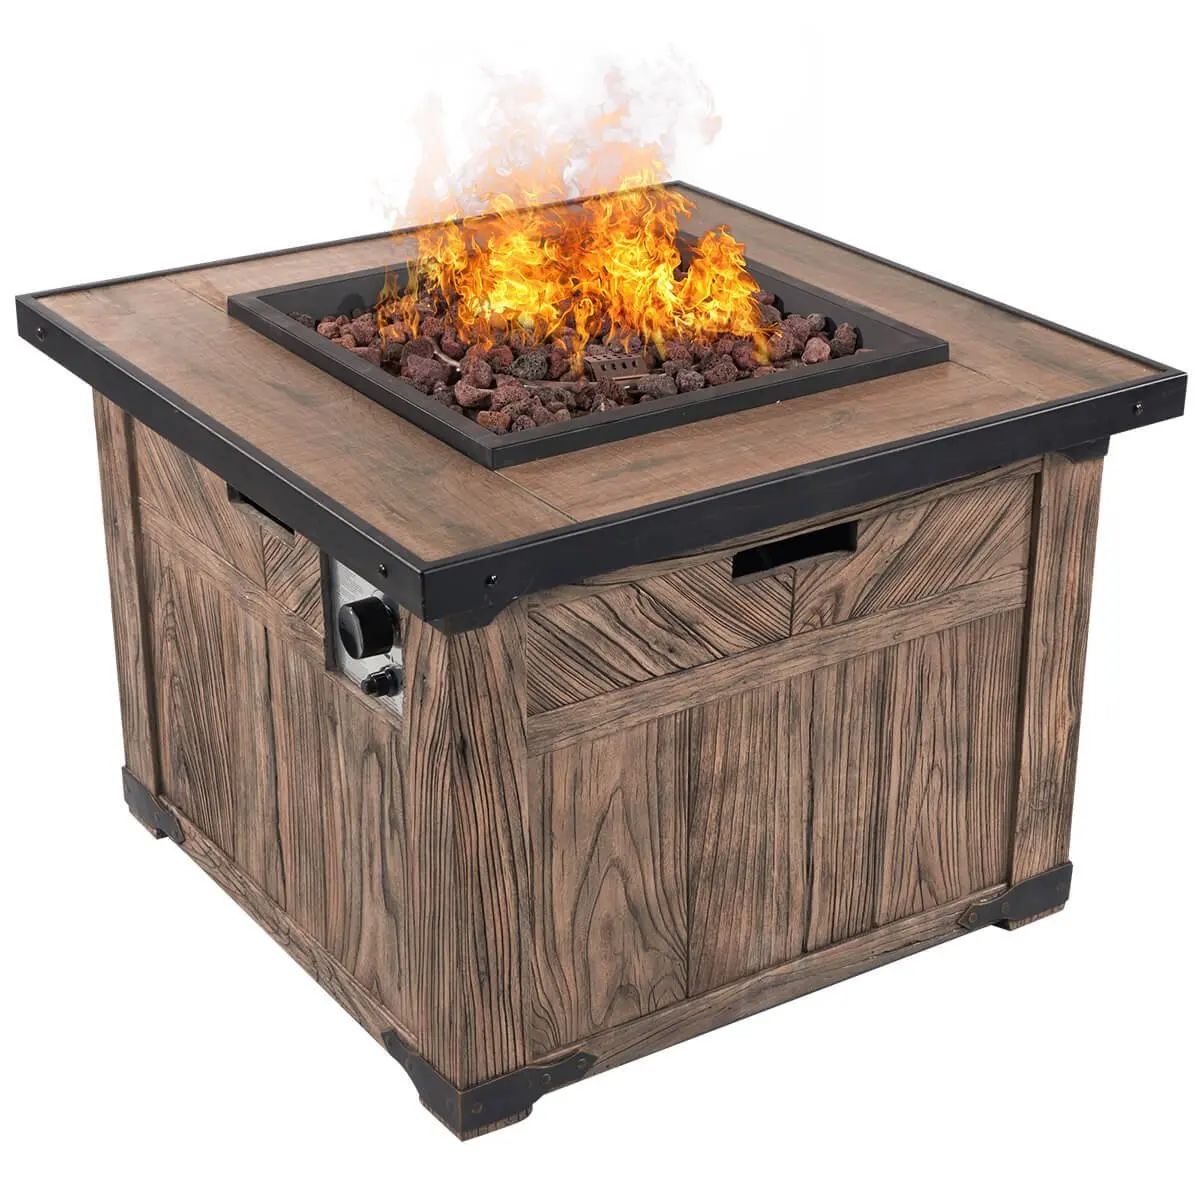 Buy DIAN 29” Outdoor Patio Gas Fire Pit Wicker Propane Gas Fire Table Lava Rock Table Top Fire Pit